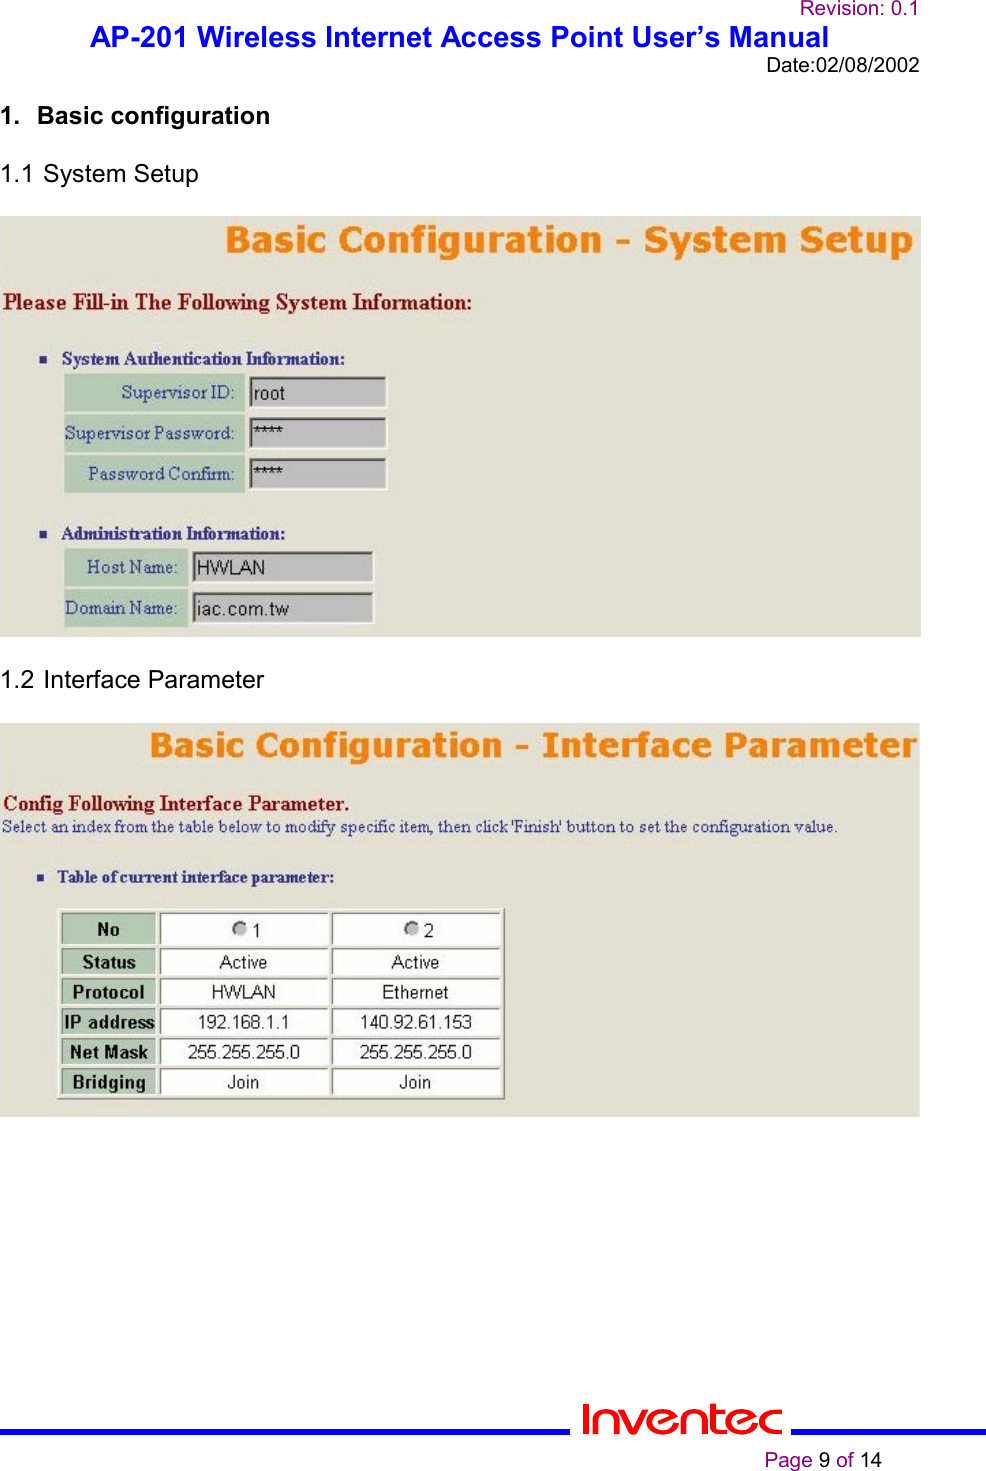 Revision: 0.1AP-201 Wireless Internet Access Point User’s ManualDate:02/08/2002                                                                                                                                                    Page 9 of 141. Basic configuration1.1 System Setup1.2 Interface Parameter